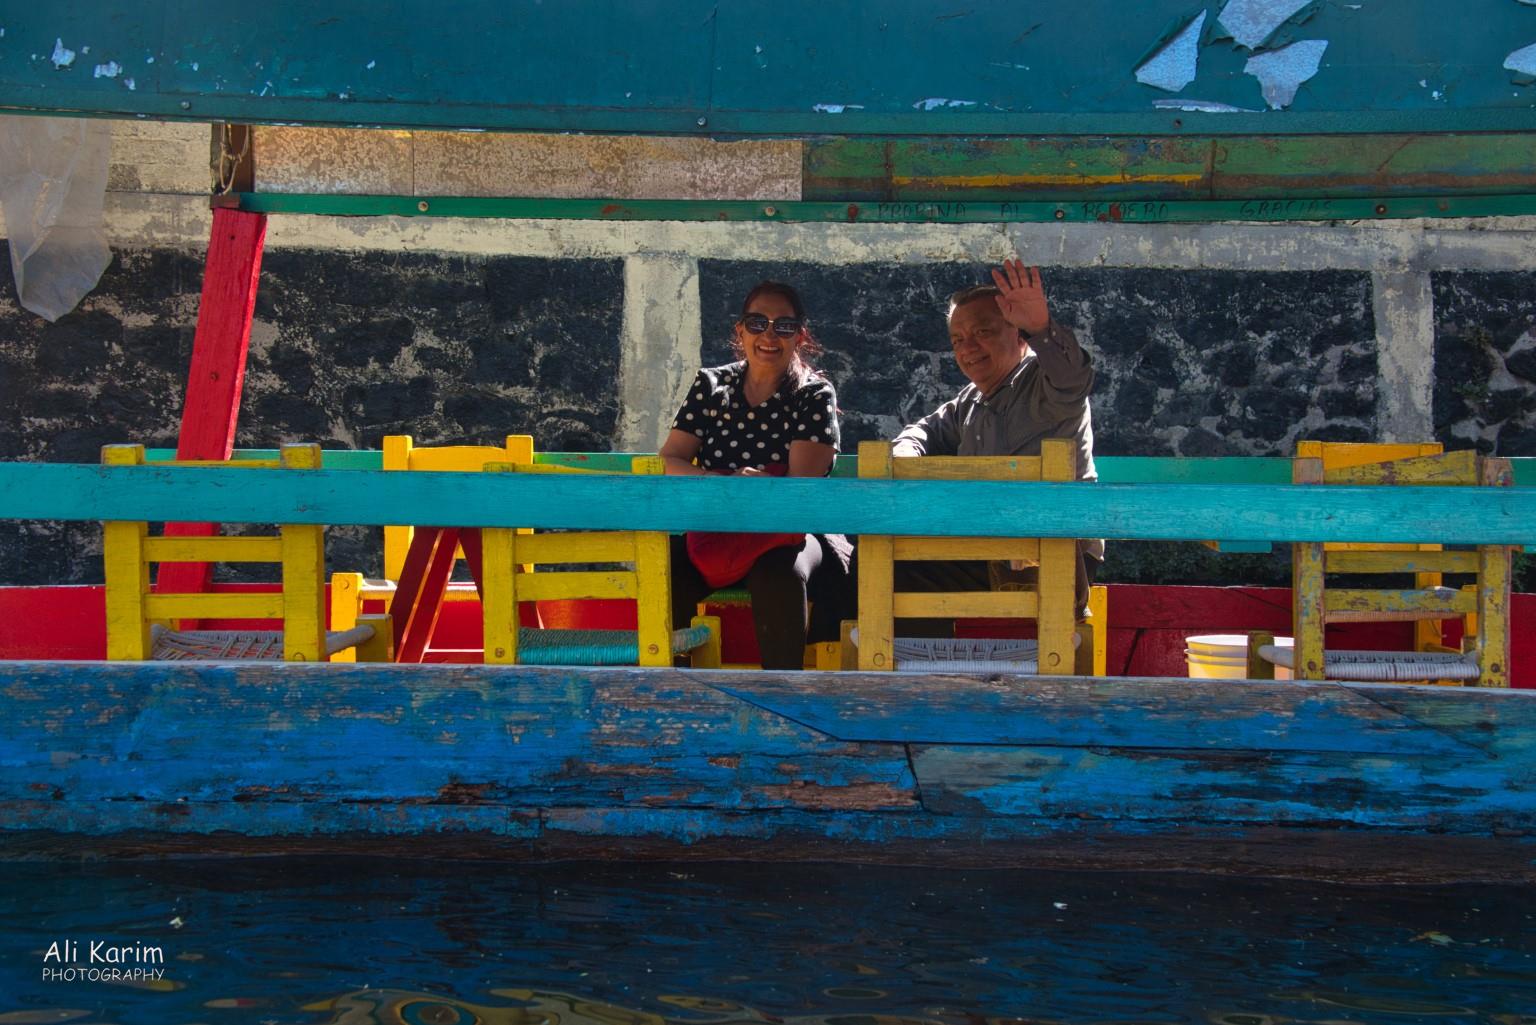 Mexico City, Mexico, Dec 2019, Friendly locals on neighboring boats